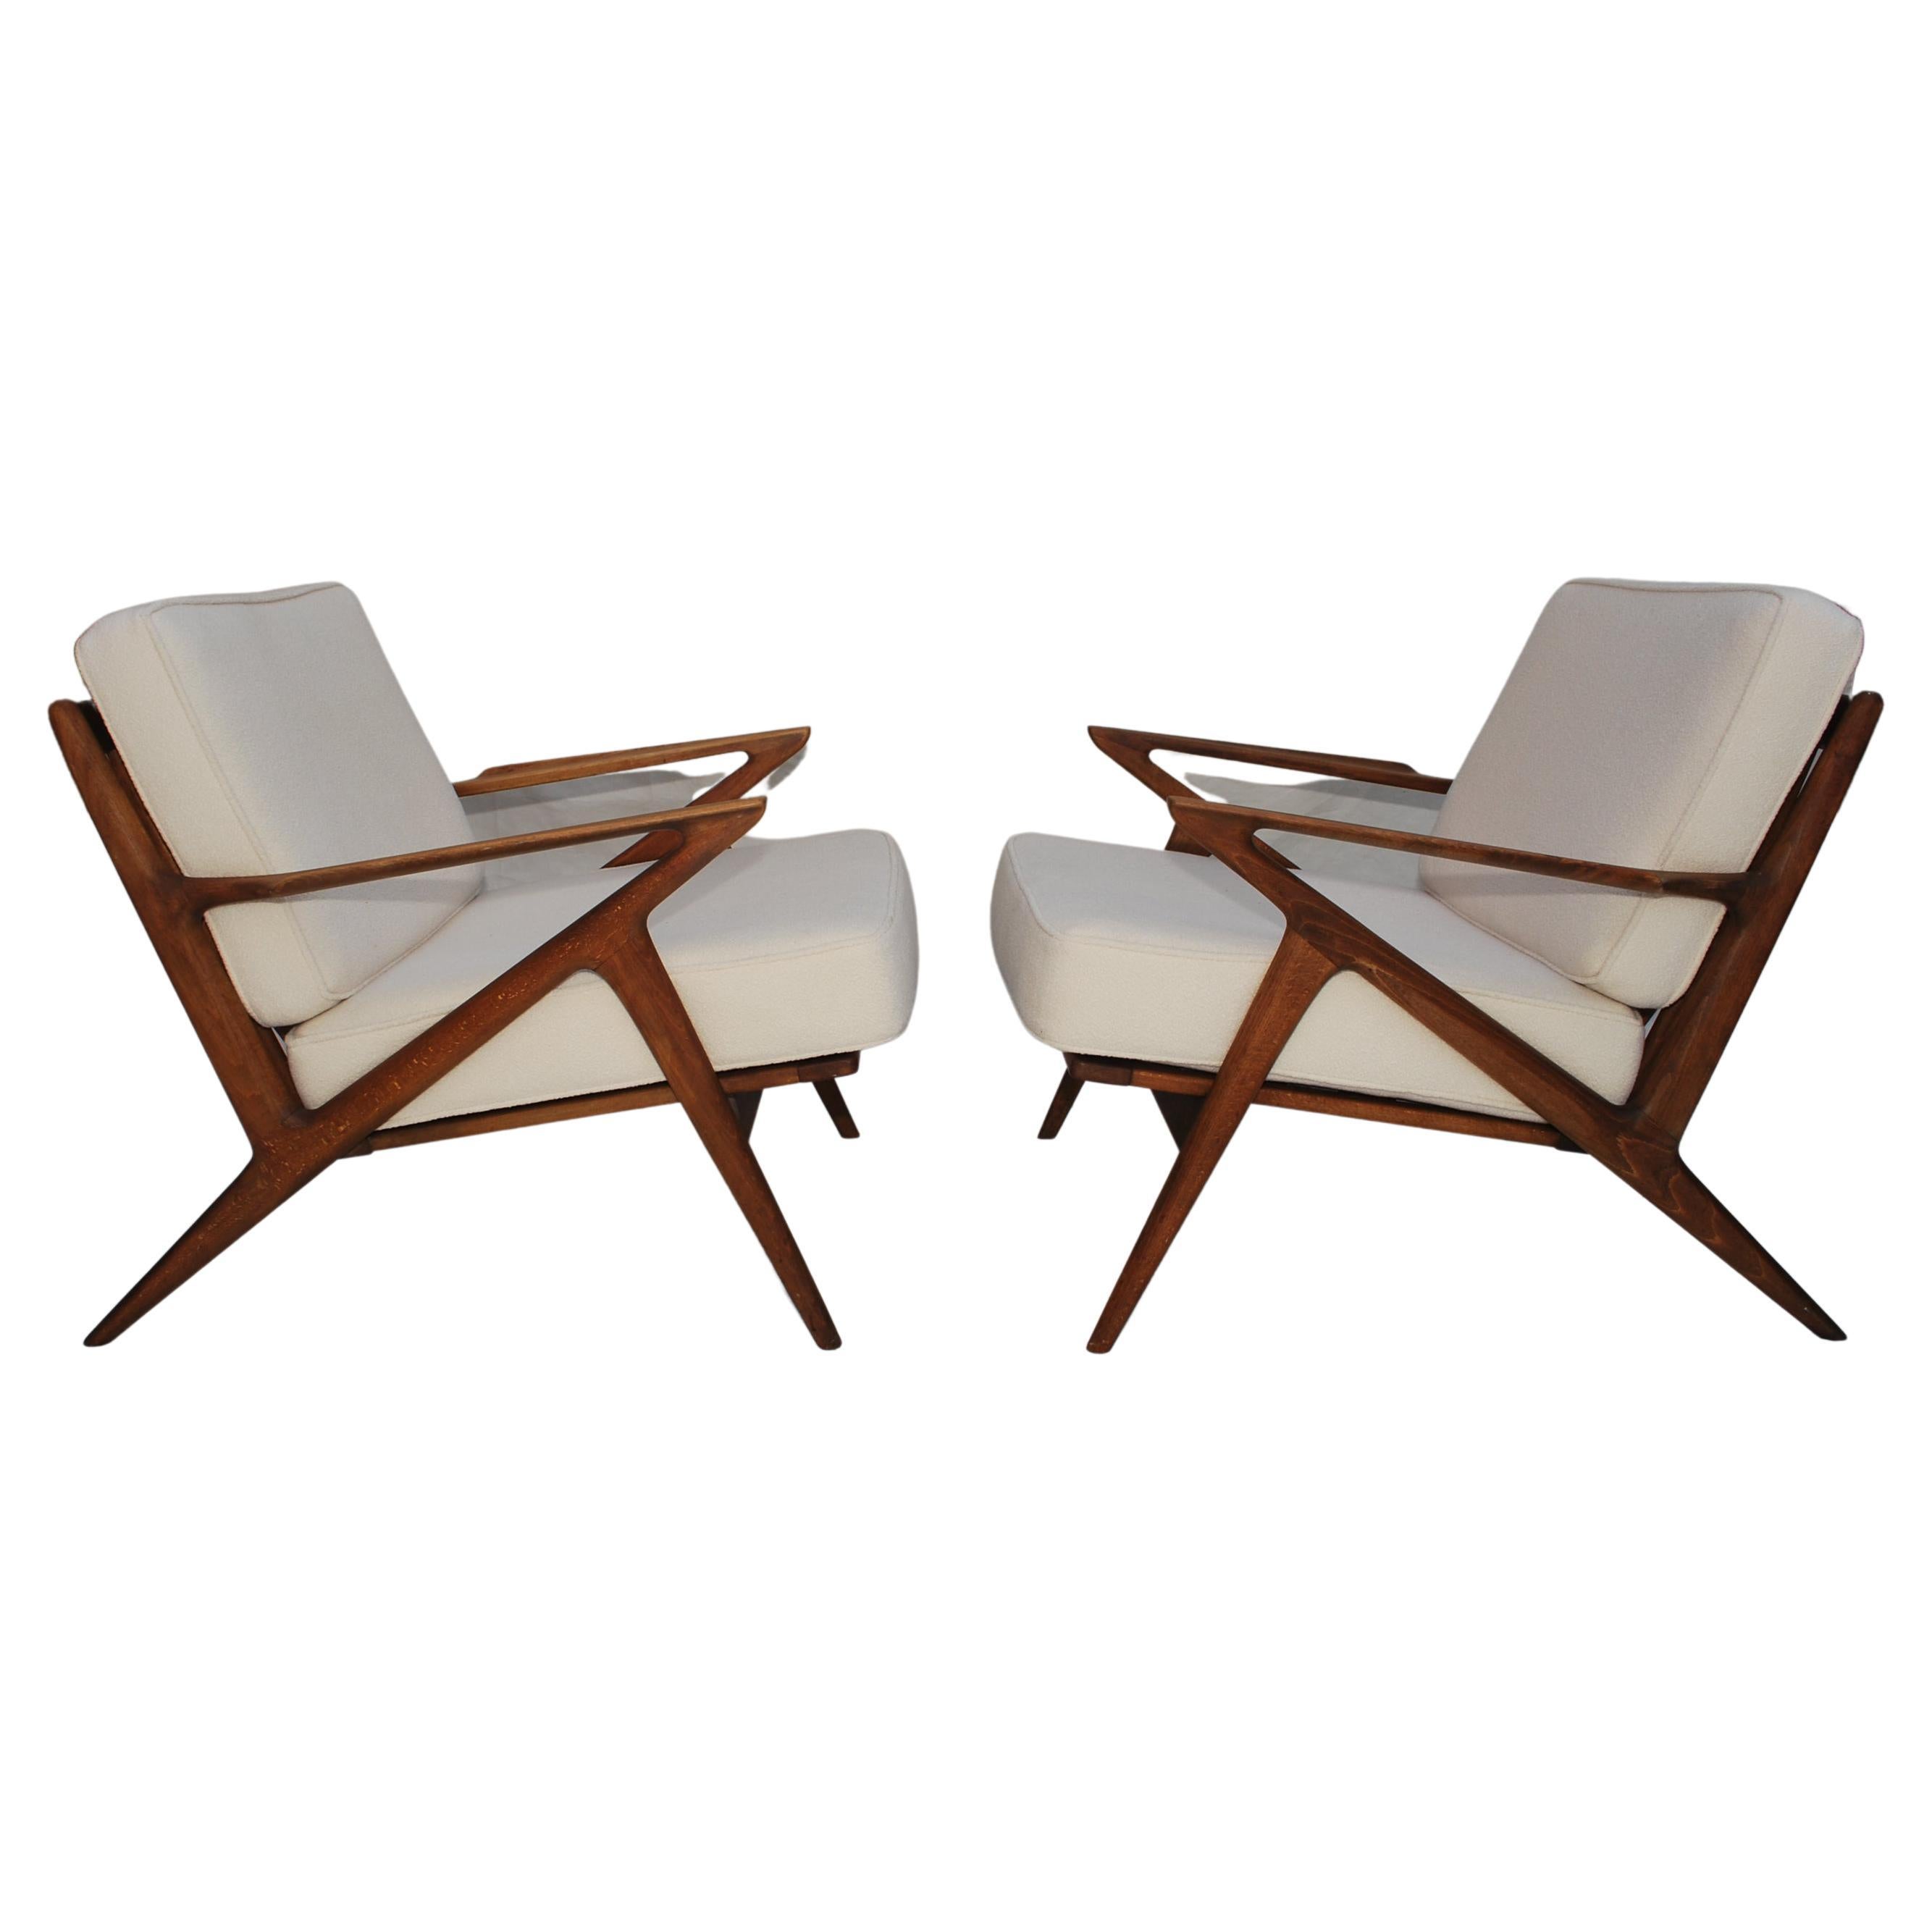 Sexy Pair of 1960's Chairs Design by Poul Jesnsen the Z Chairs Design